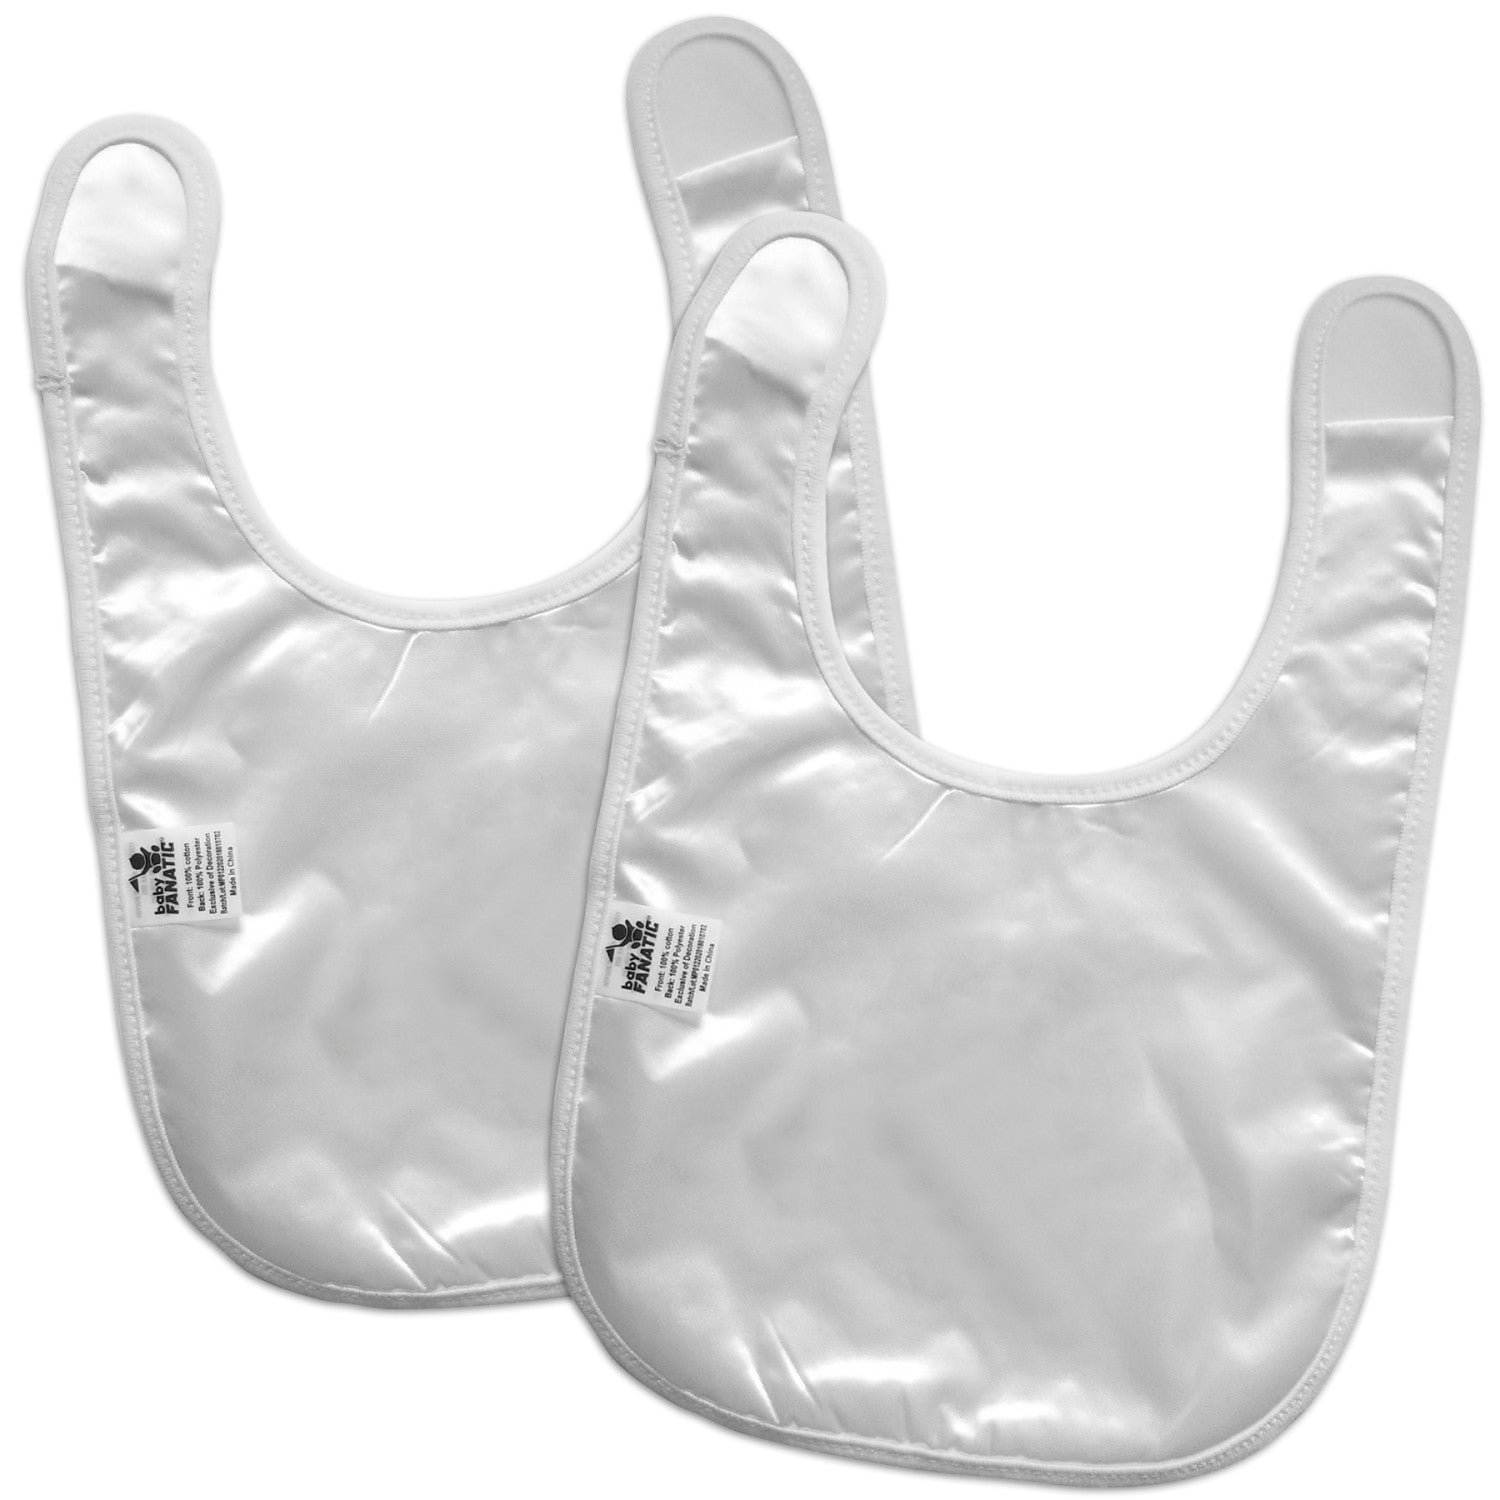 Baby Fanatic Officially Licensed Unisex Baby Bibs 2 Pack - Nfl